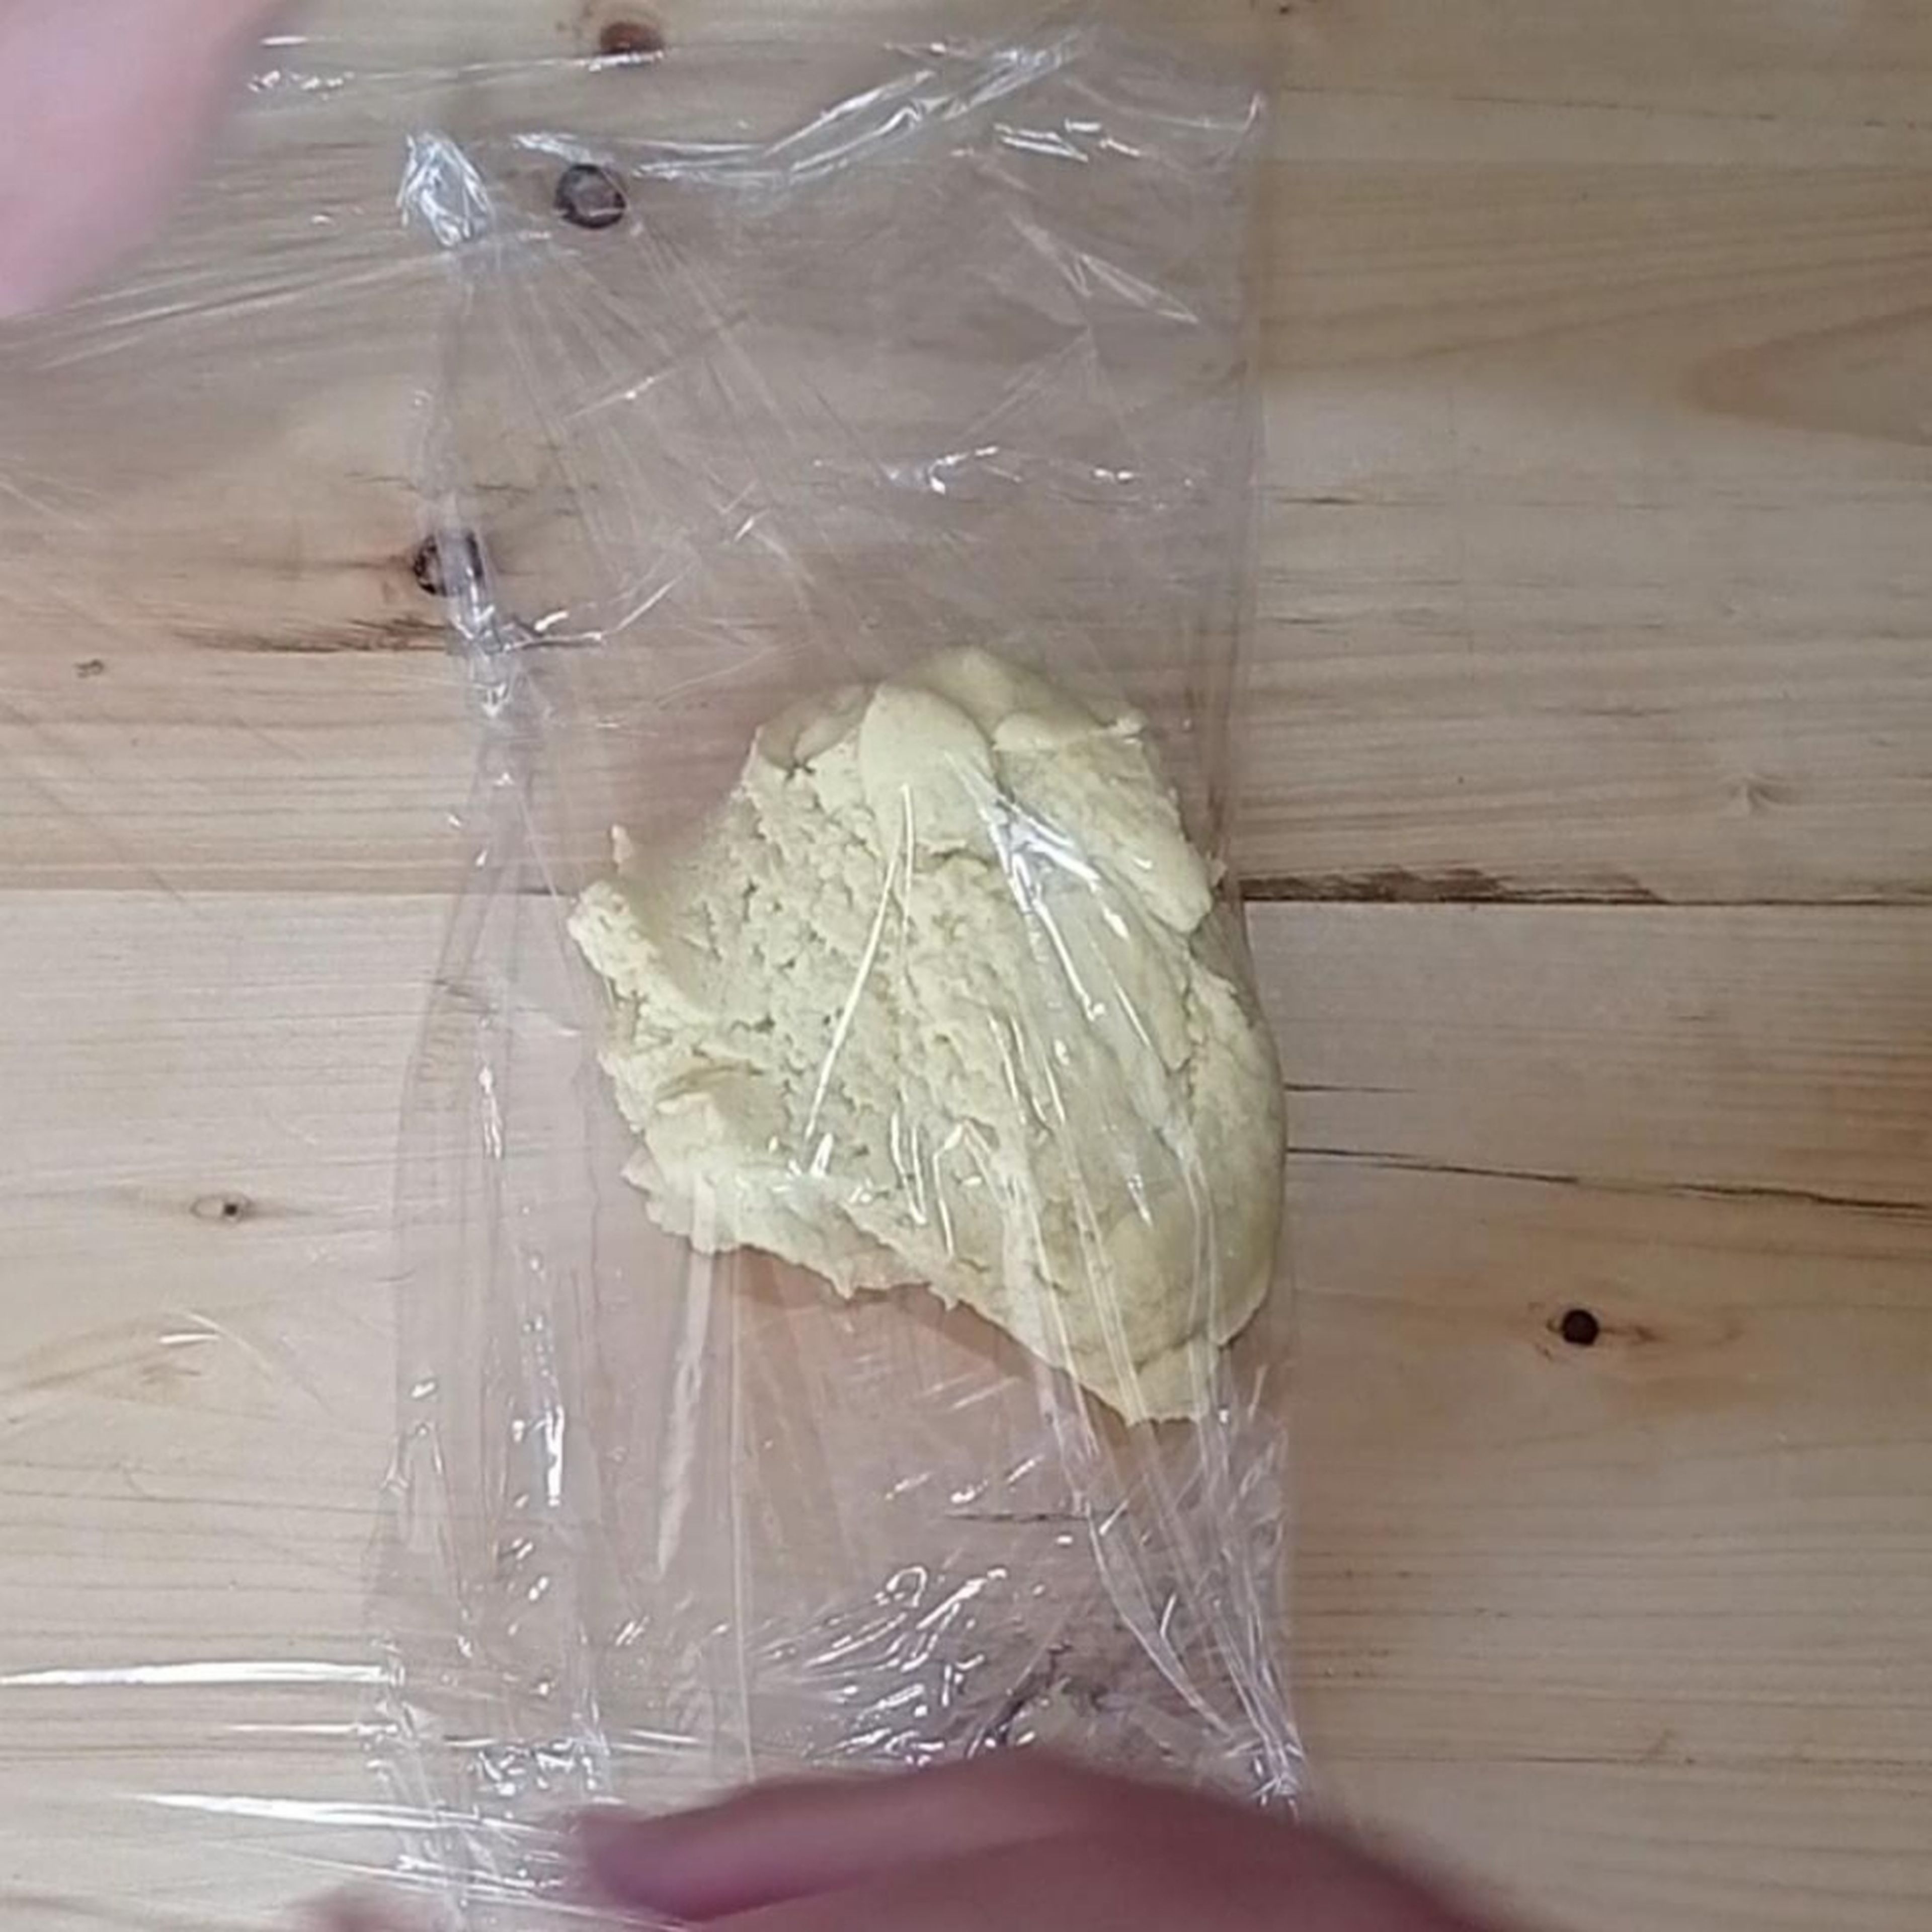 Wrap the dough with plastic wrap and keep in the fridge for 1 hour